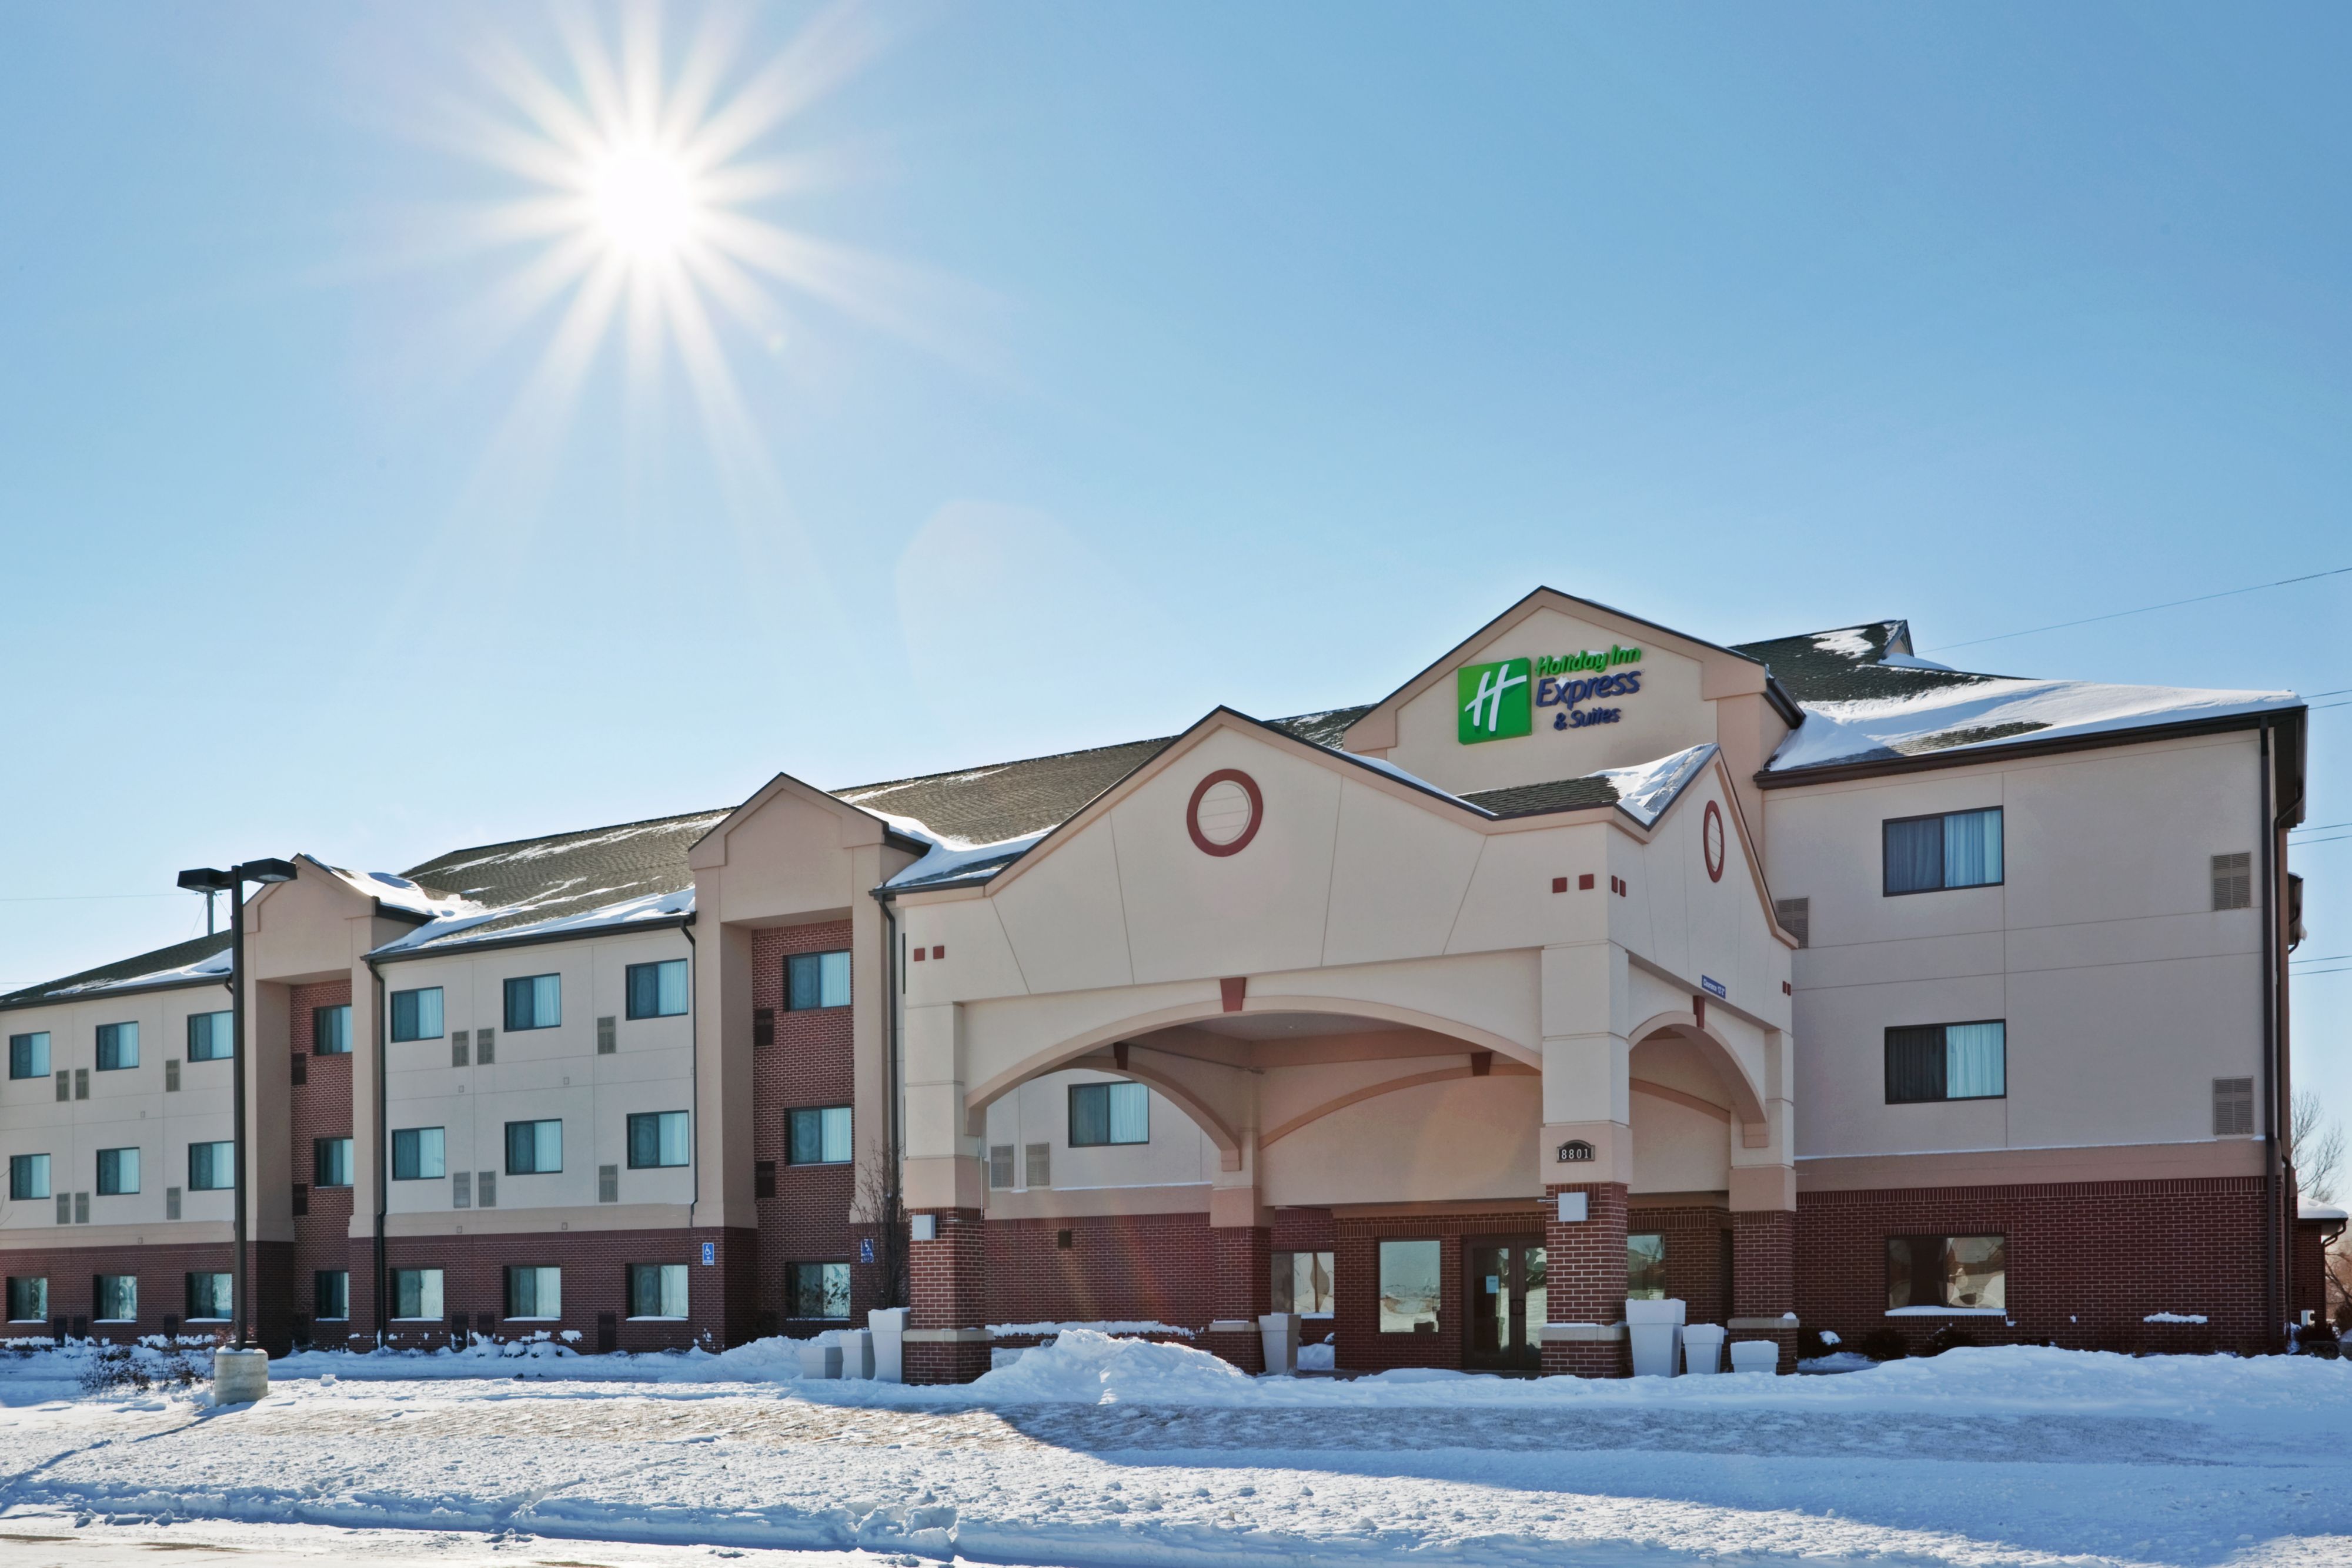 holiday-inn-express-and-suites-lincoln-4282852132-original.jpg